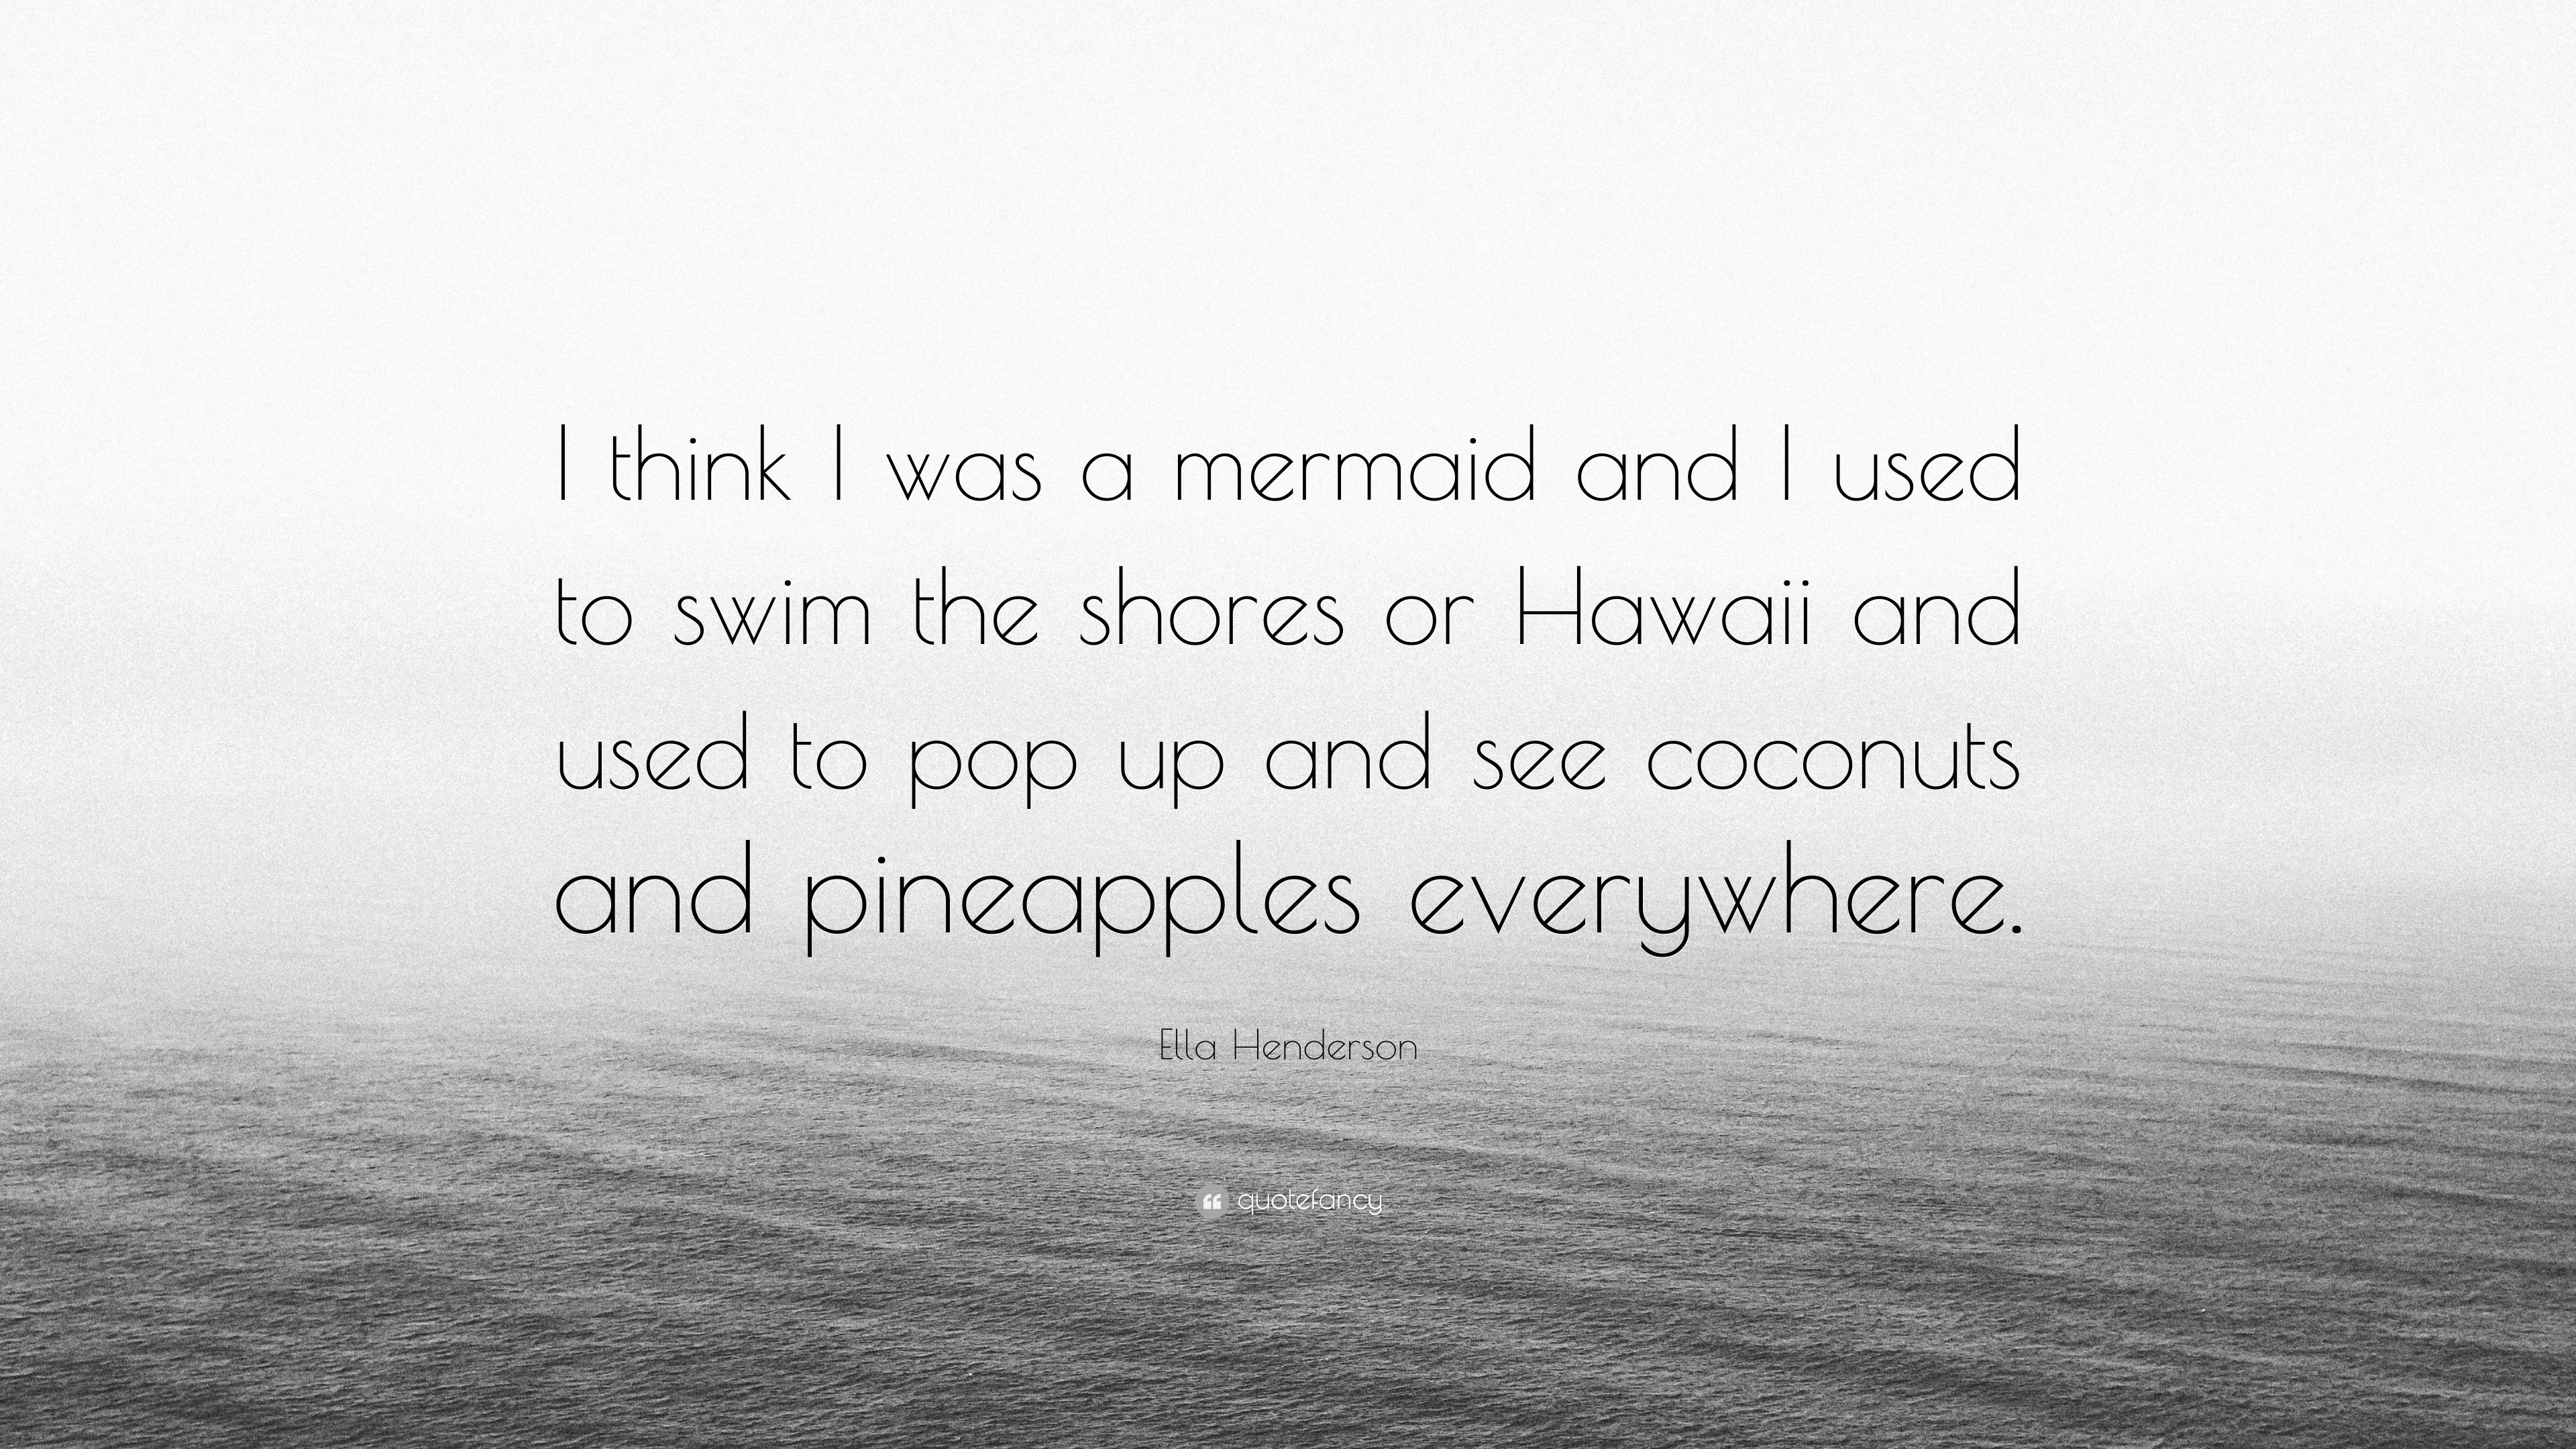 Ella Henderson Quote: “I think I was a mermaid and I used to